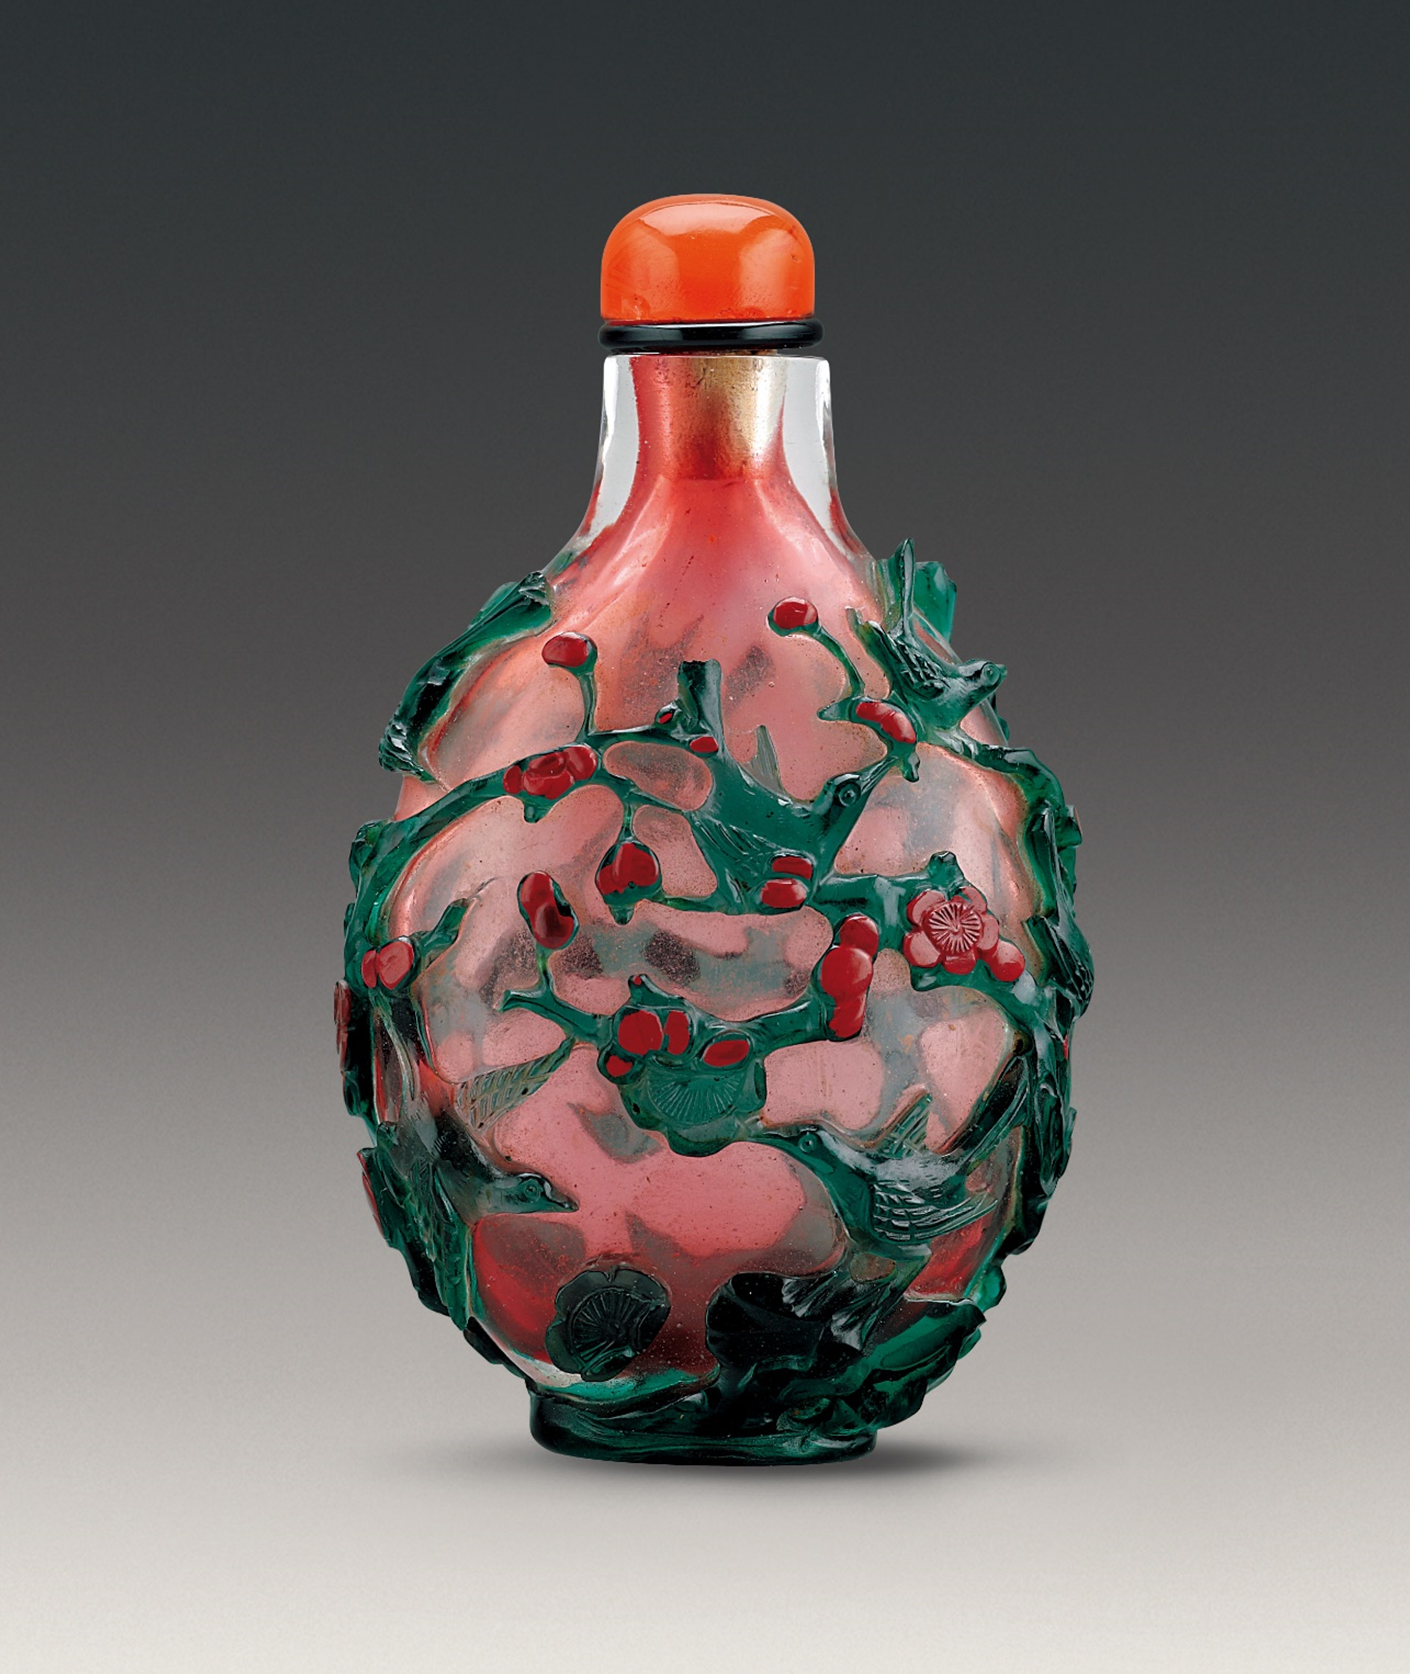 The Hong Kong Museum of Art today (September 28) announced that Christopher and Josephine Sin generously donated nearly 500 pieces of Chinese snuff bottles from the Fuyun Xuan Collection of Chinese Snuff Bottles for the museum's permanent collection. Picture shows the newly donated glass snuff bottle carved with magpies and plums design in double overlay on light rouge ground. Overlay glass was an original creation of the Qing court.
